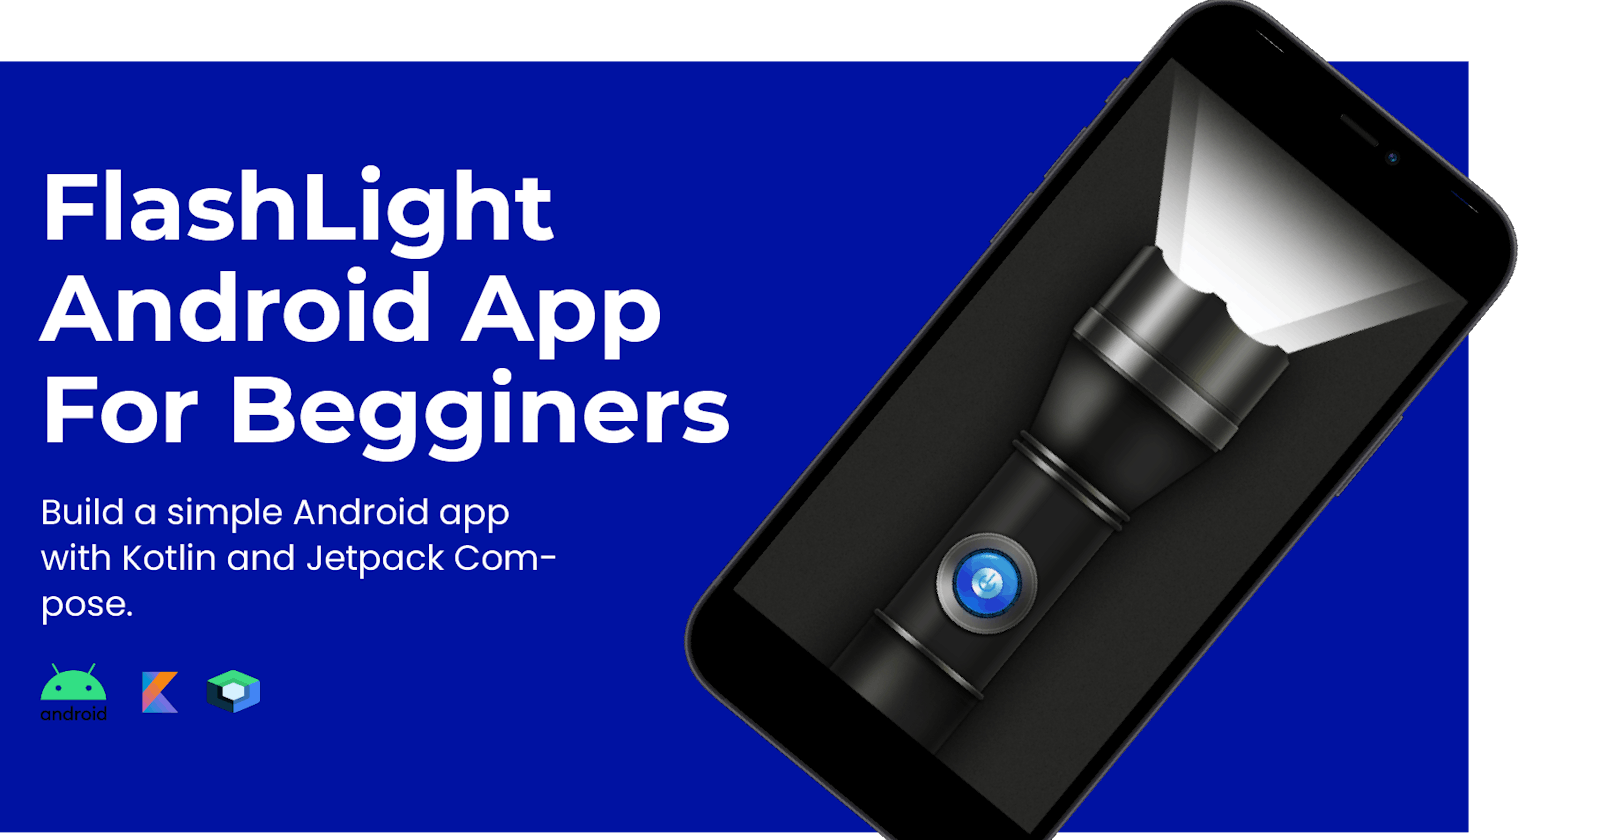 Flashlight Android App For Beginners